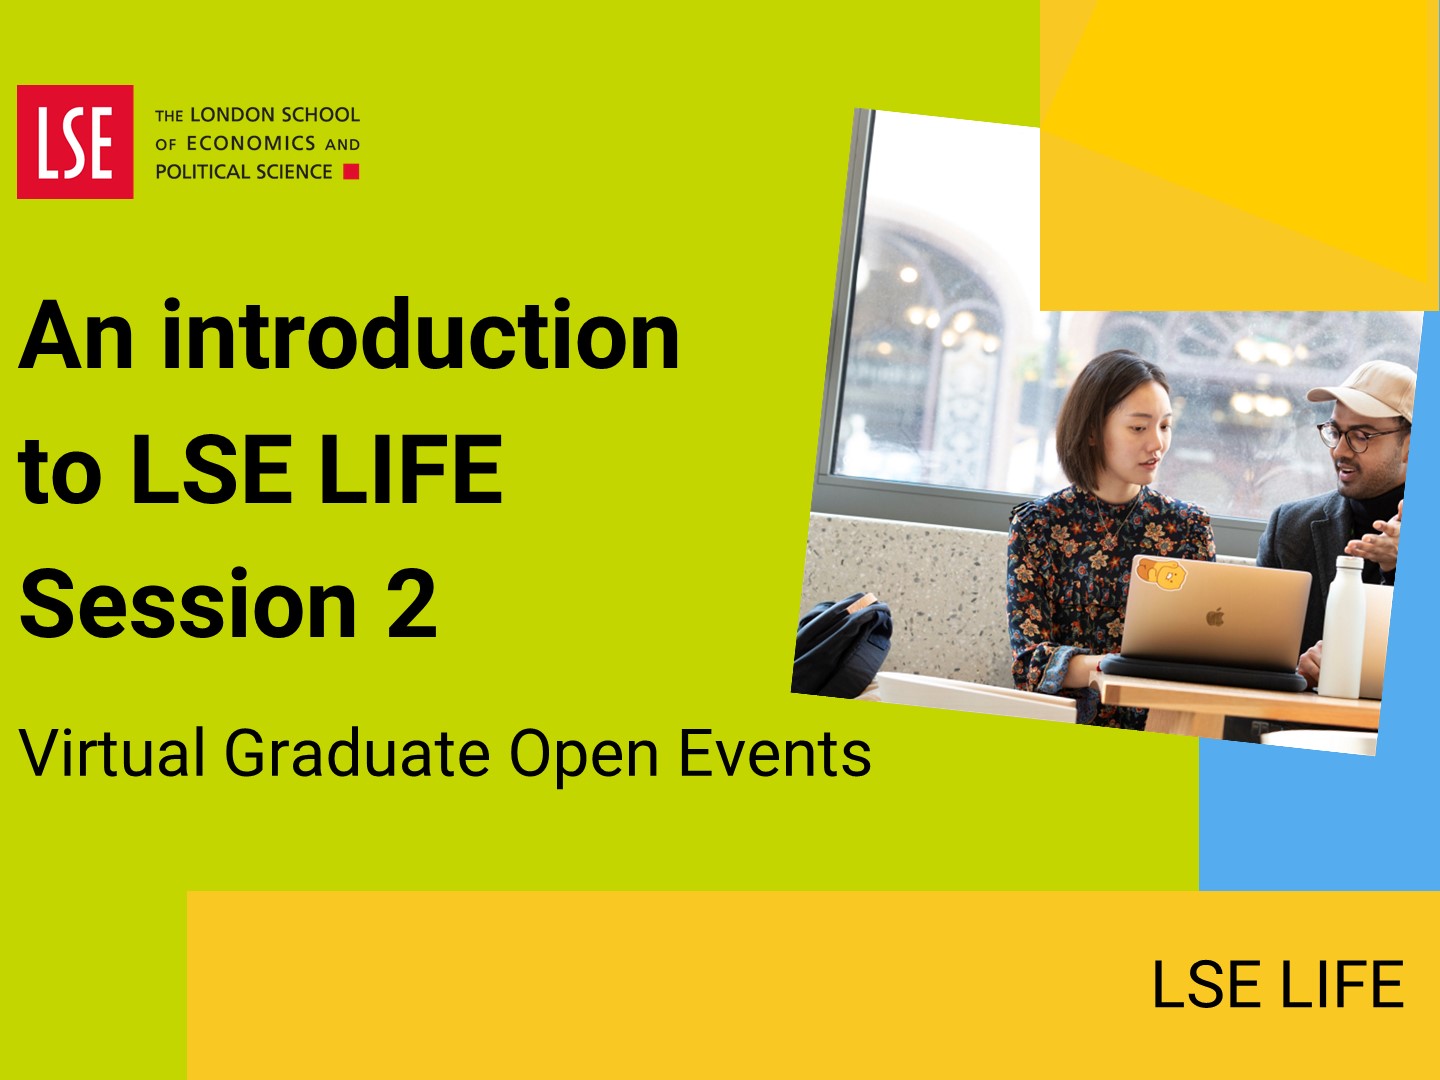 An introduction to LSE LIFE (session 2)